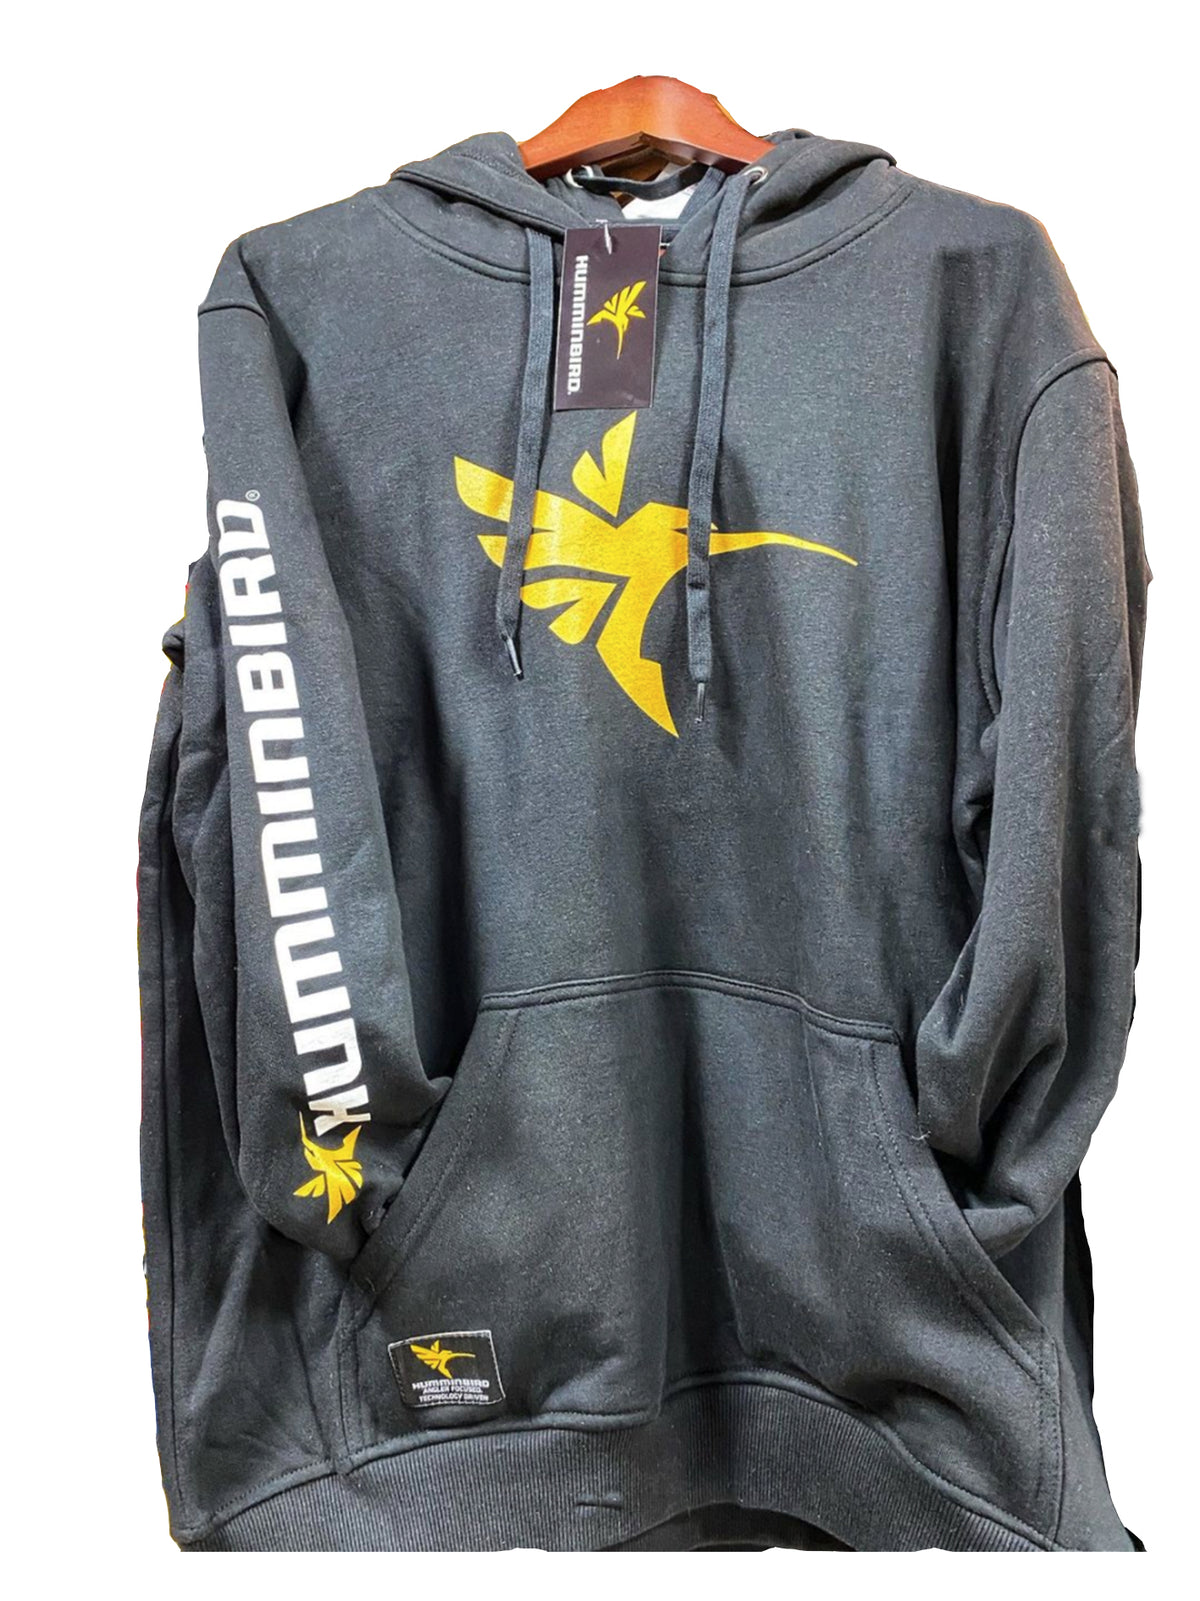 Humminbird - New Humminbird apparel is available, including the